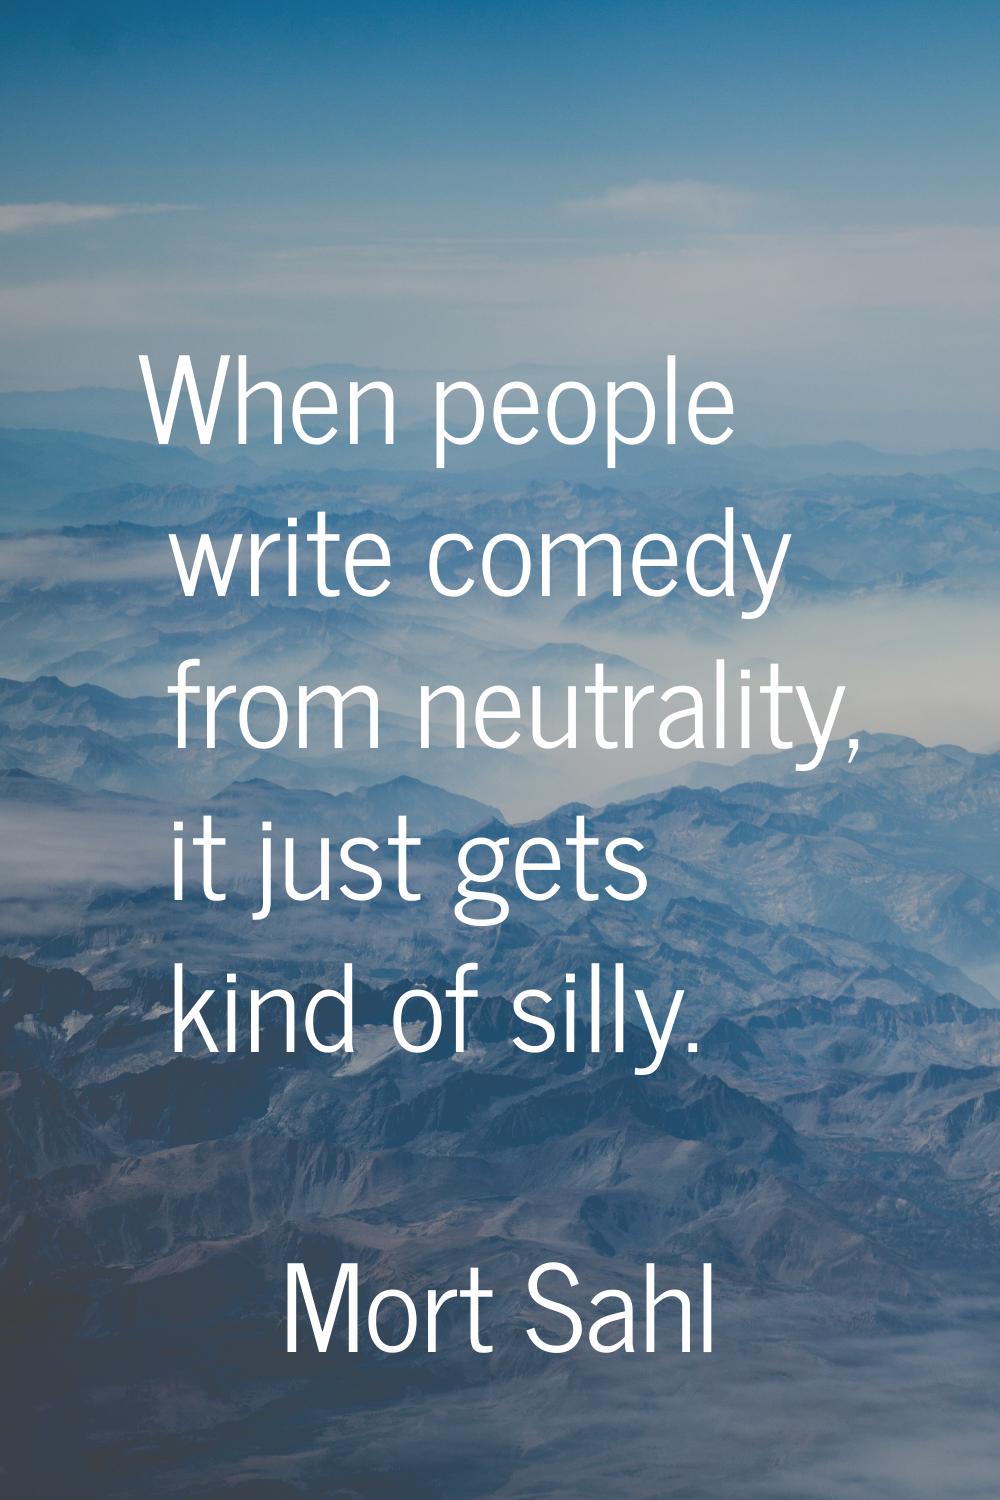 When people write comedy from neutrality, it just gets kind of silly.